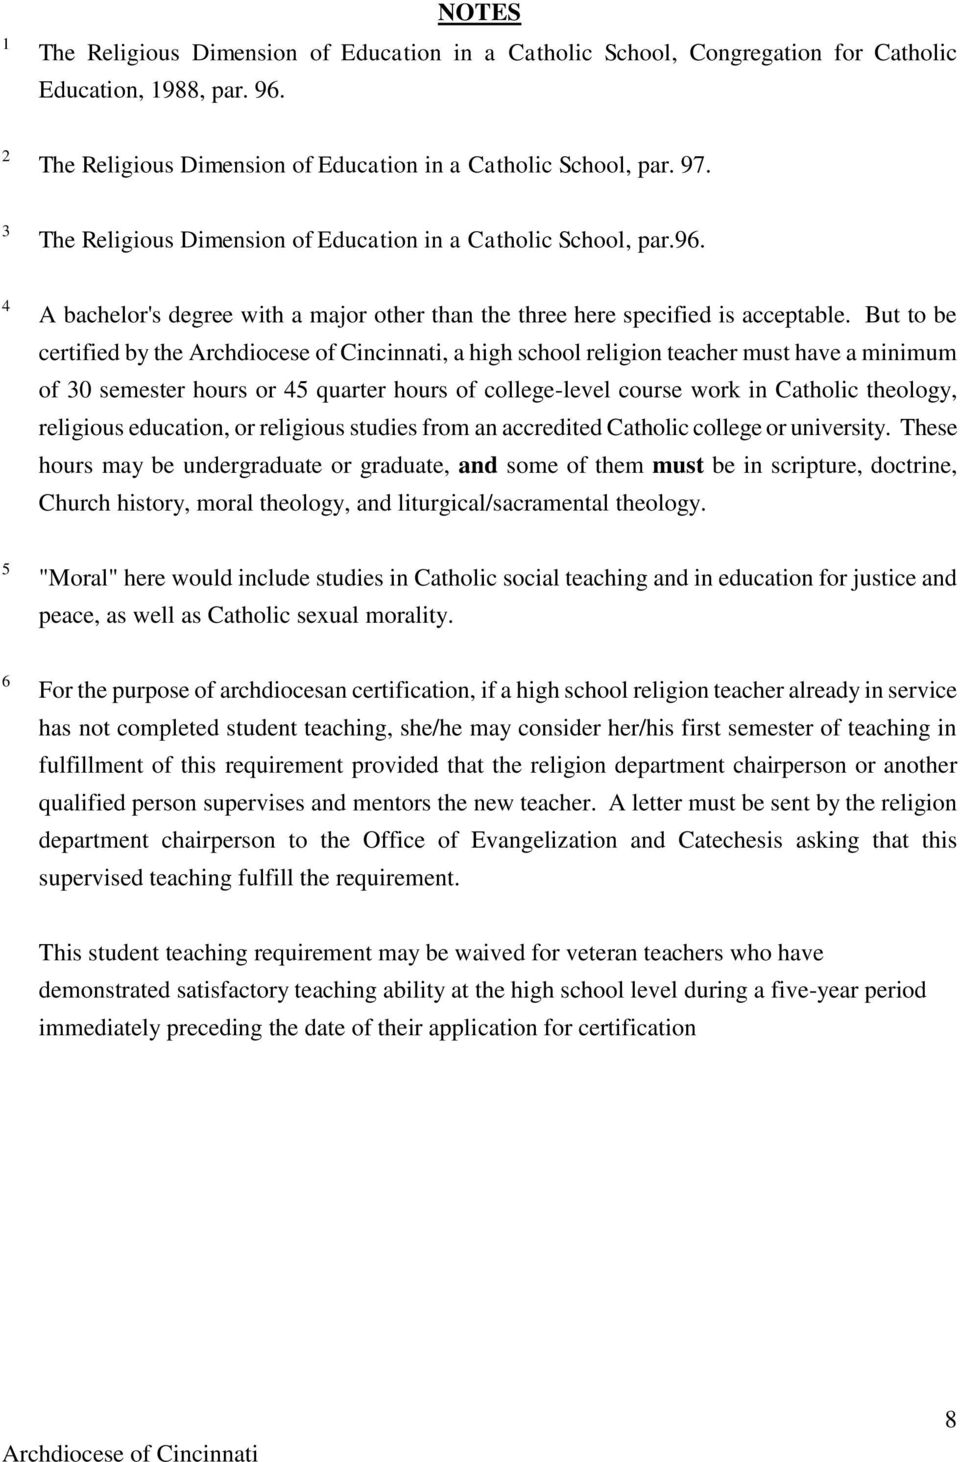 But to be certified by the Archdiocese of Cincinnati, a high school religion teacher must have a minimum of 30 semester hours or 45 quarter hours of college-level course work in Catholic theology,